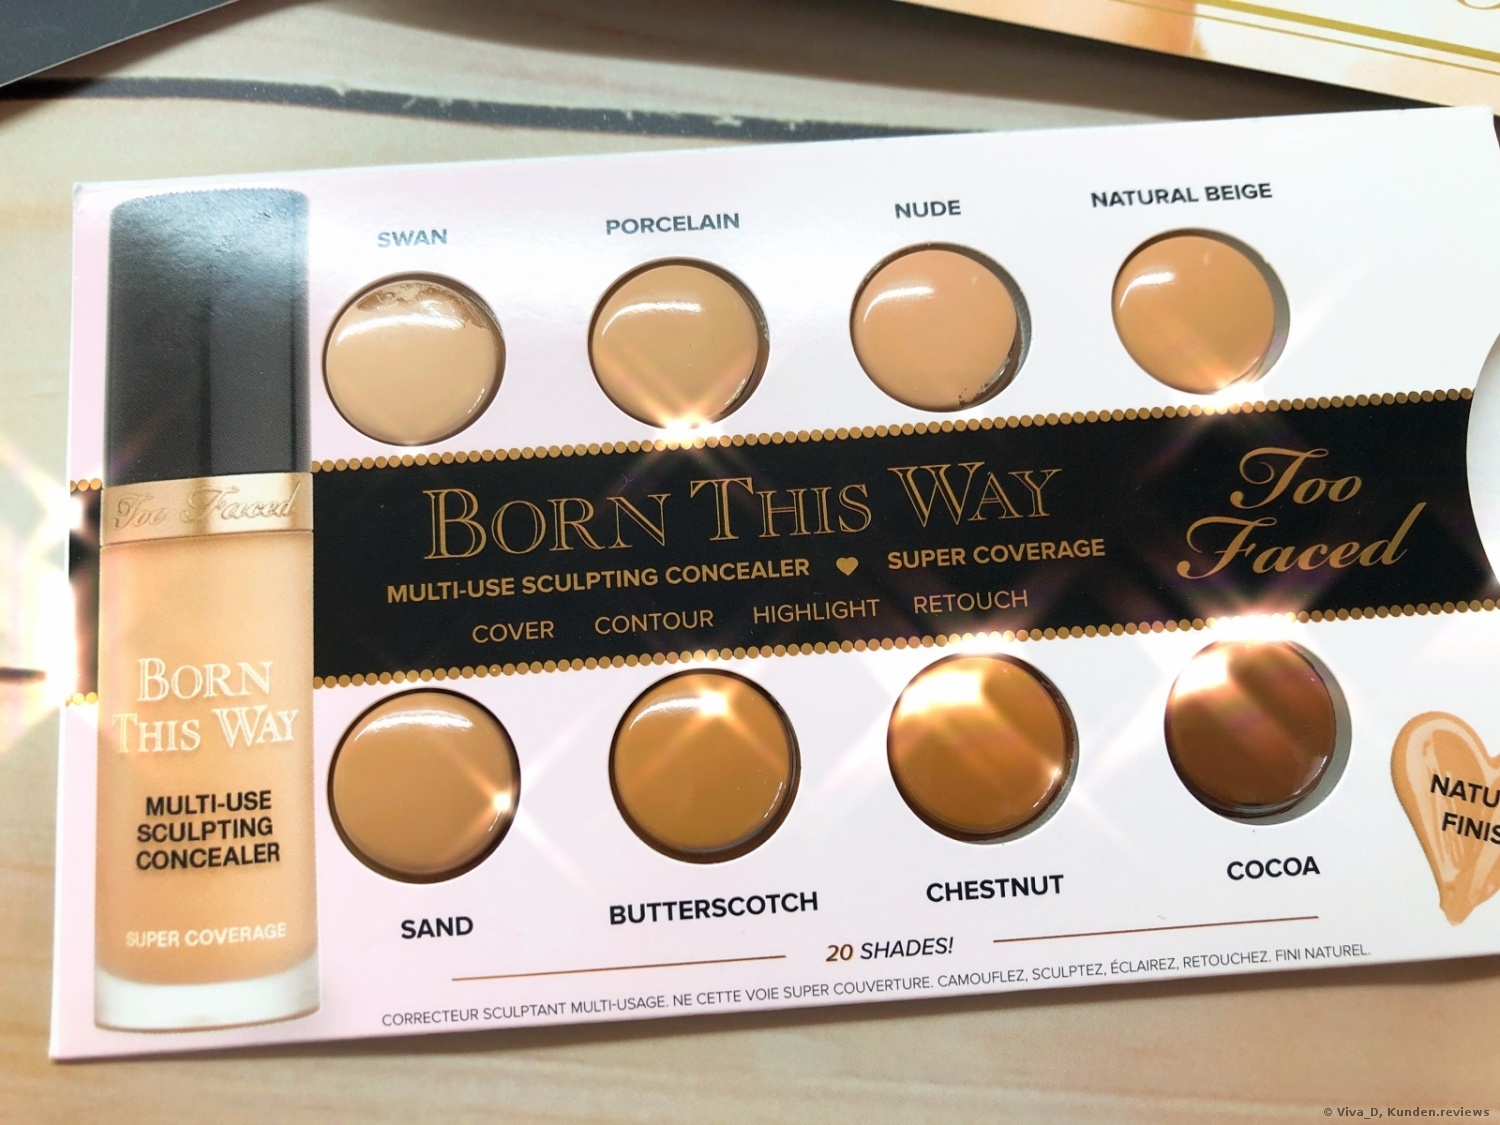 Too Faced BORN THIS WAY Super Coverage Concealer